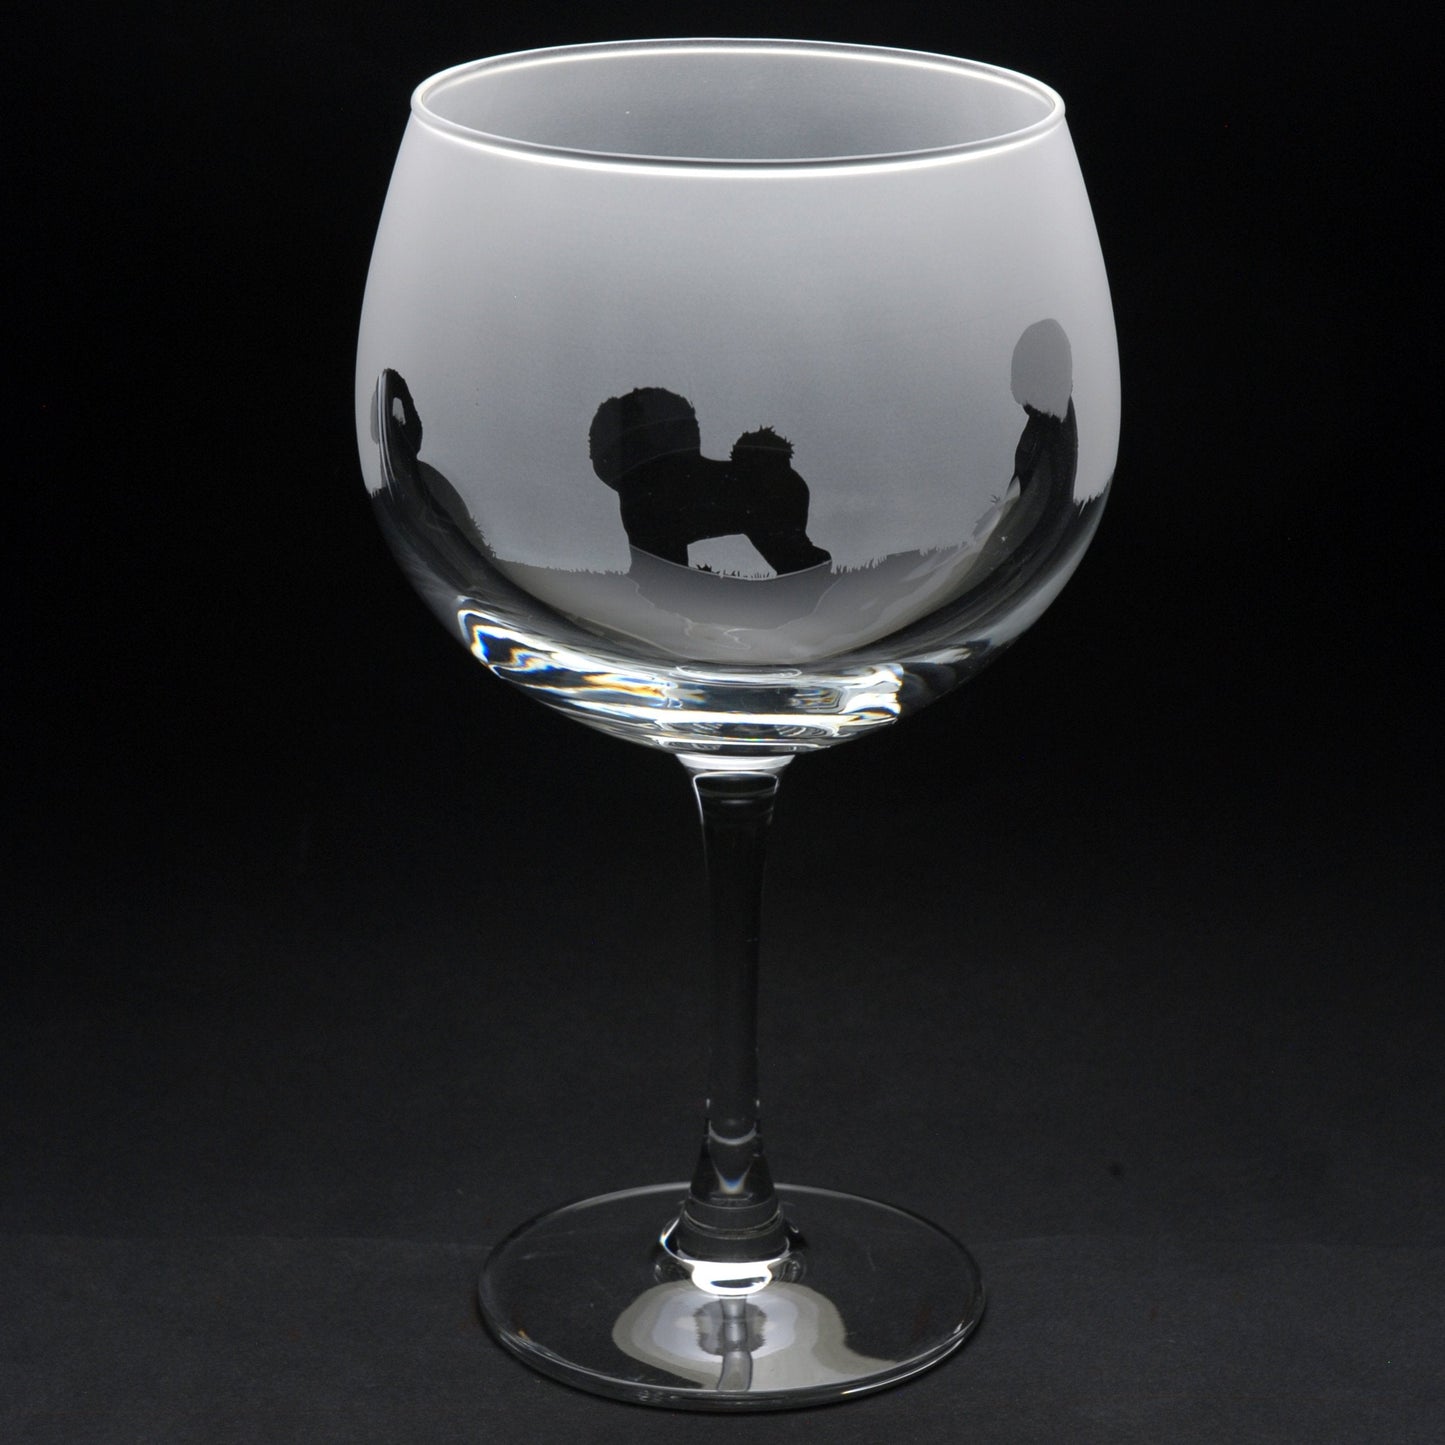 Bichon Frise Dog Gin Cocktail Glass - Hand Etched/Engraved Gift